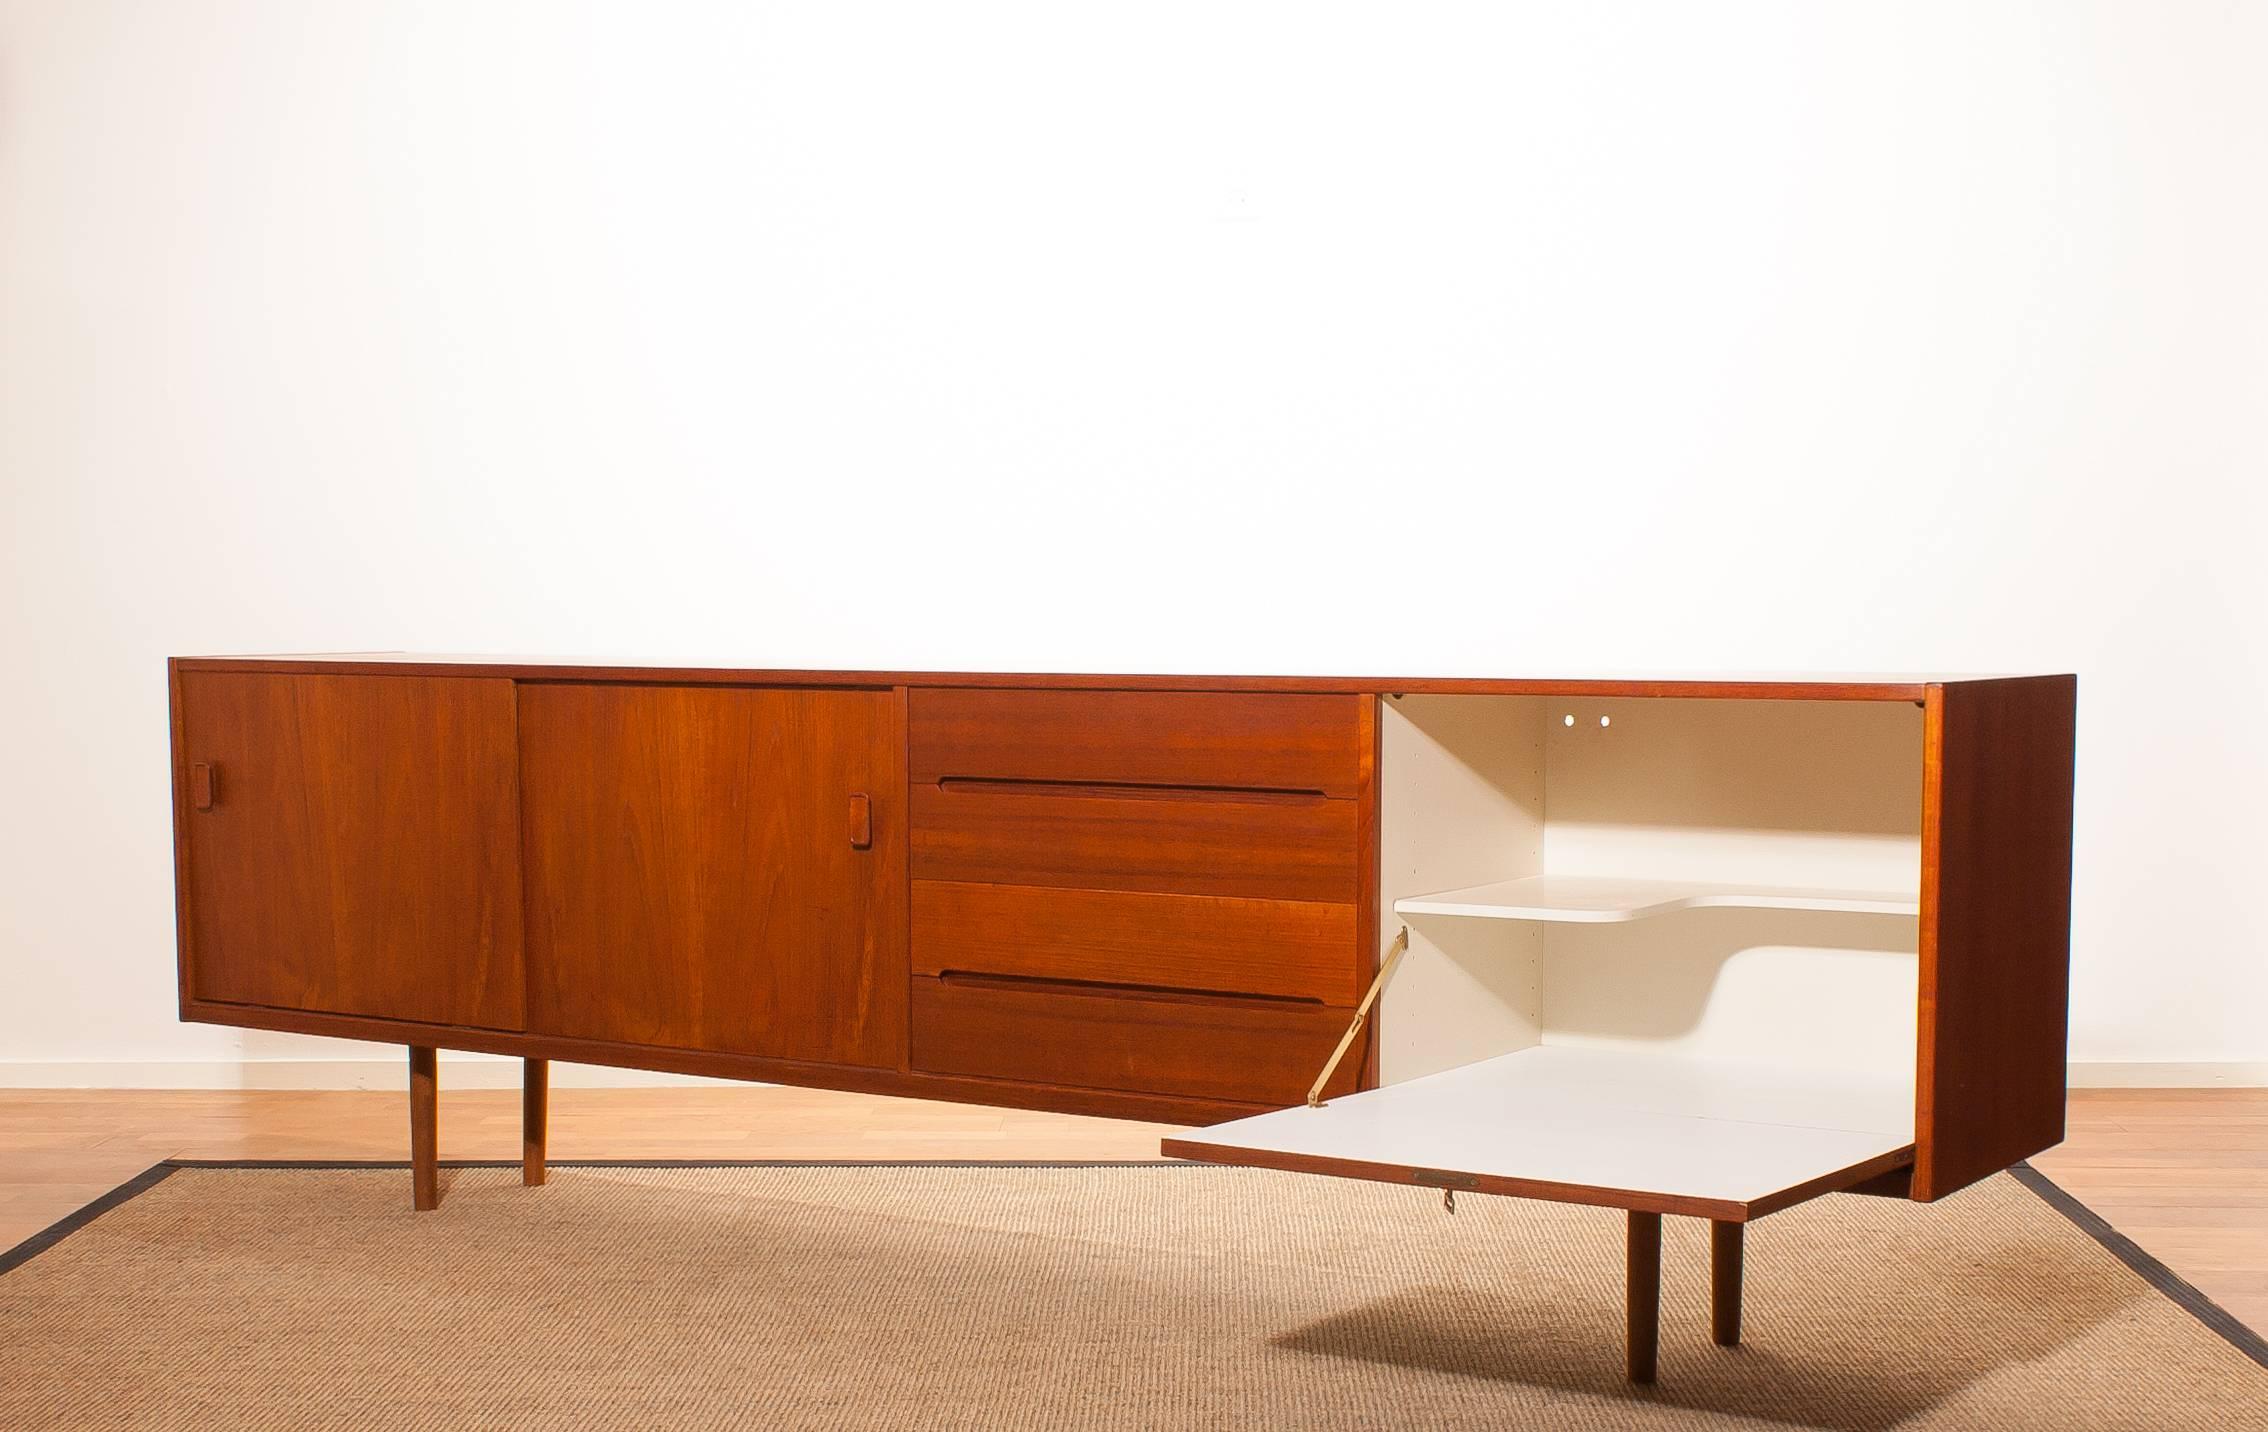 Beautiful teak sideboard 'Grand' designed by Nils Johnson for Troeds Bjärum Sweden.
This sideboard has two drawers and three doors.
It is in a very nice condition.
Period 1960s
Dimensions: H 76 cm , W 253 cm , D 43 cm.

 